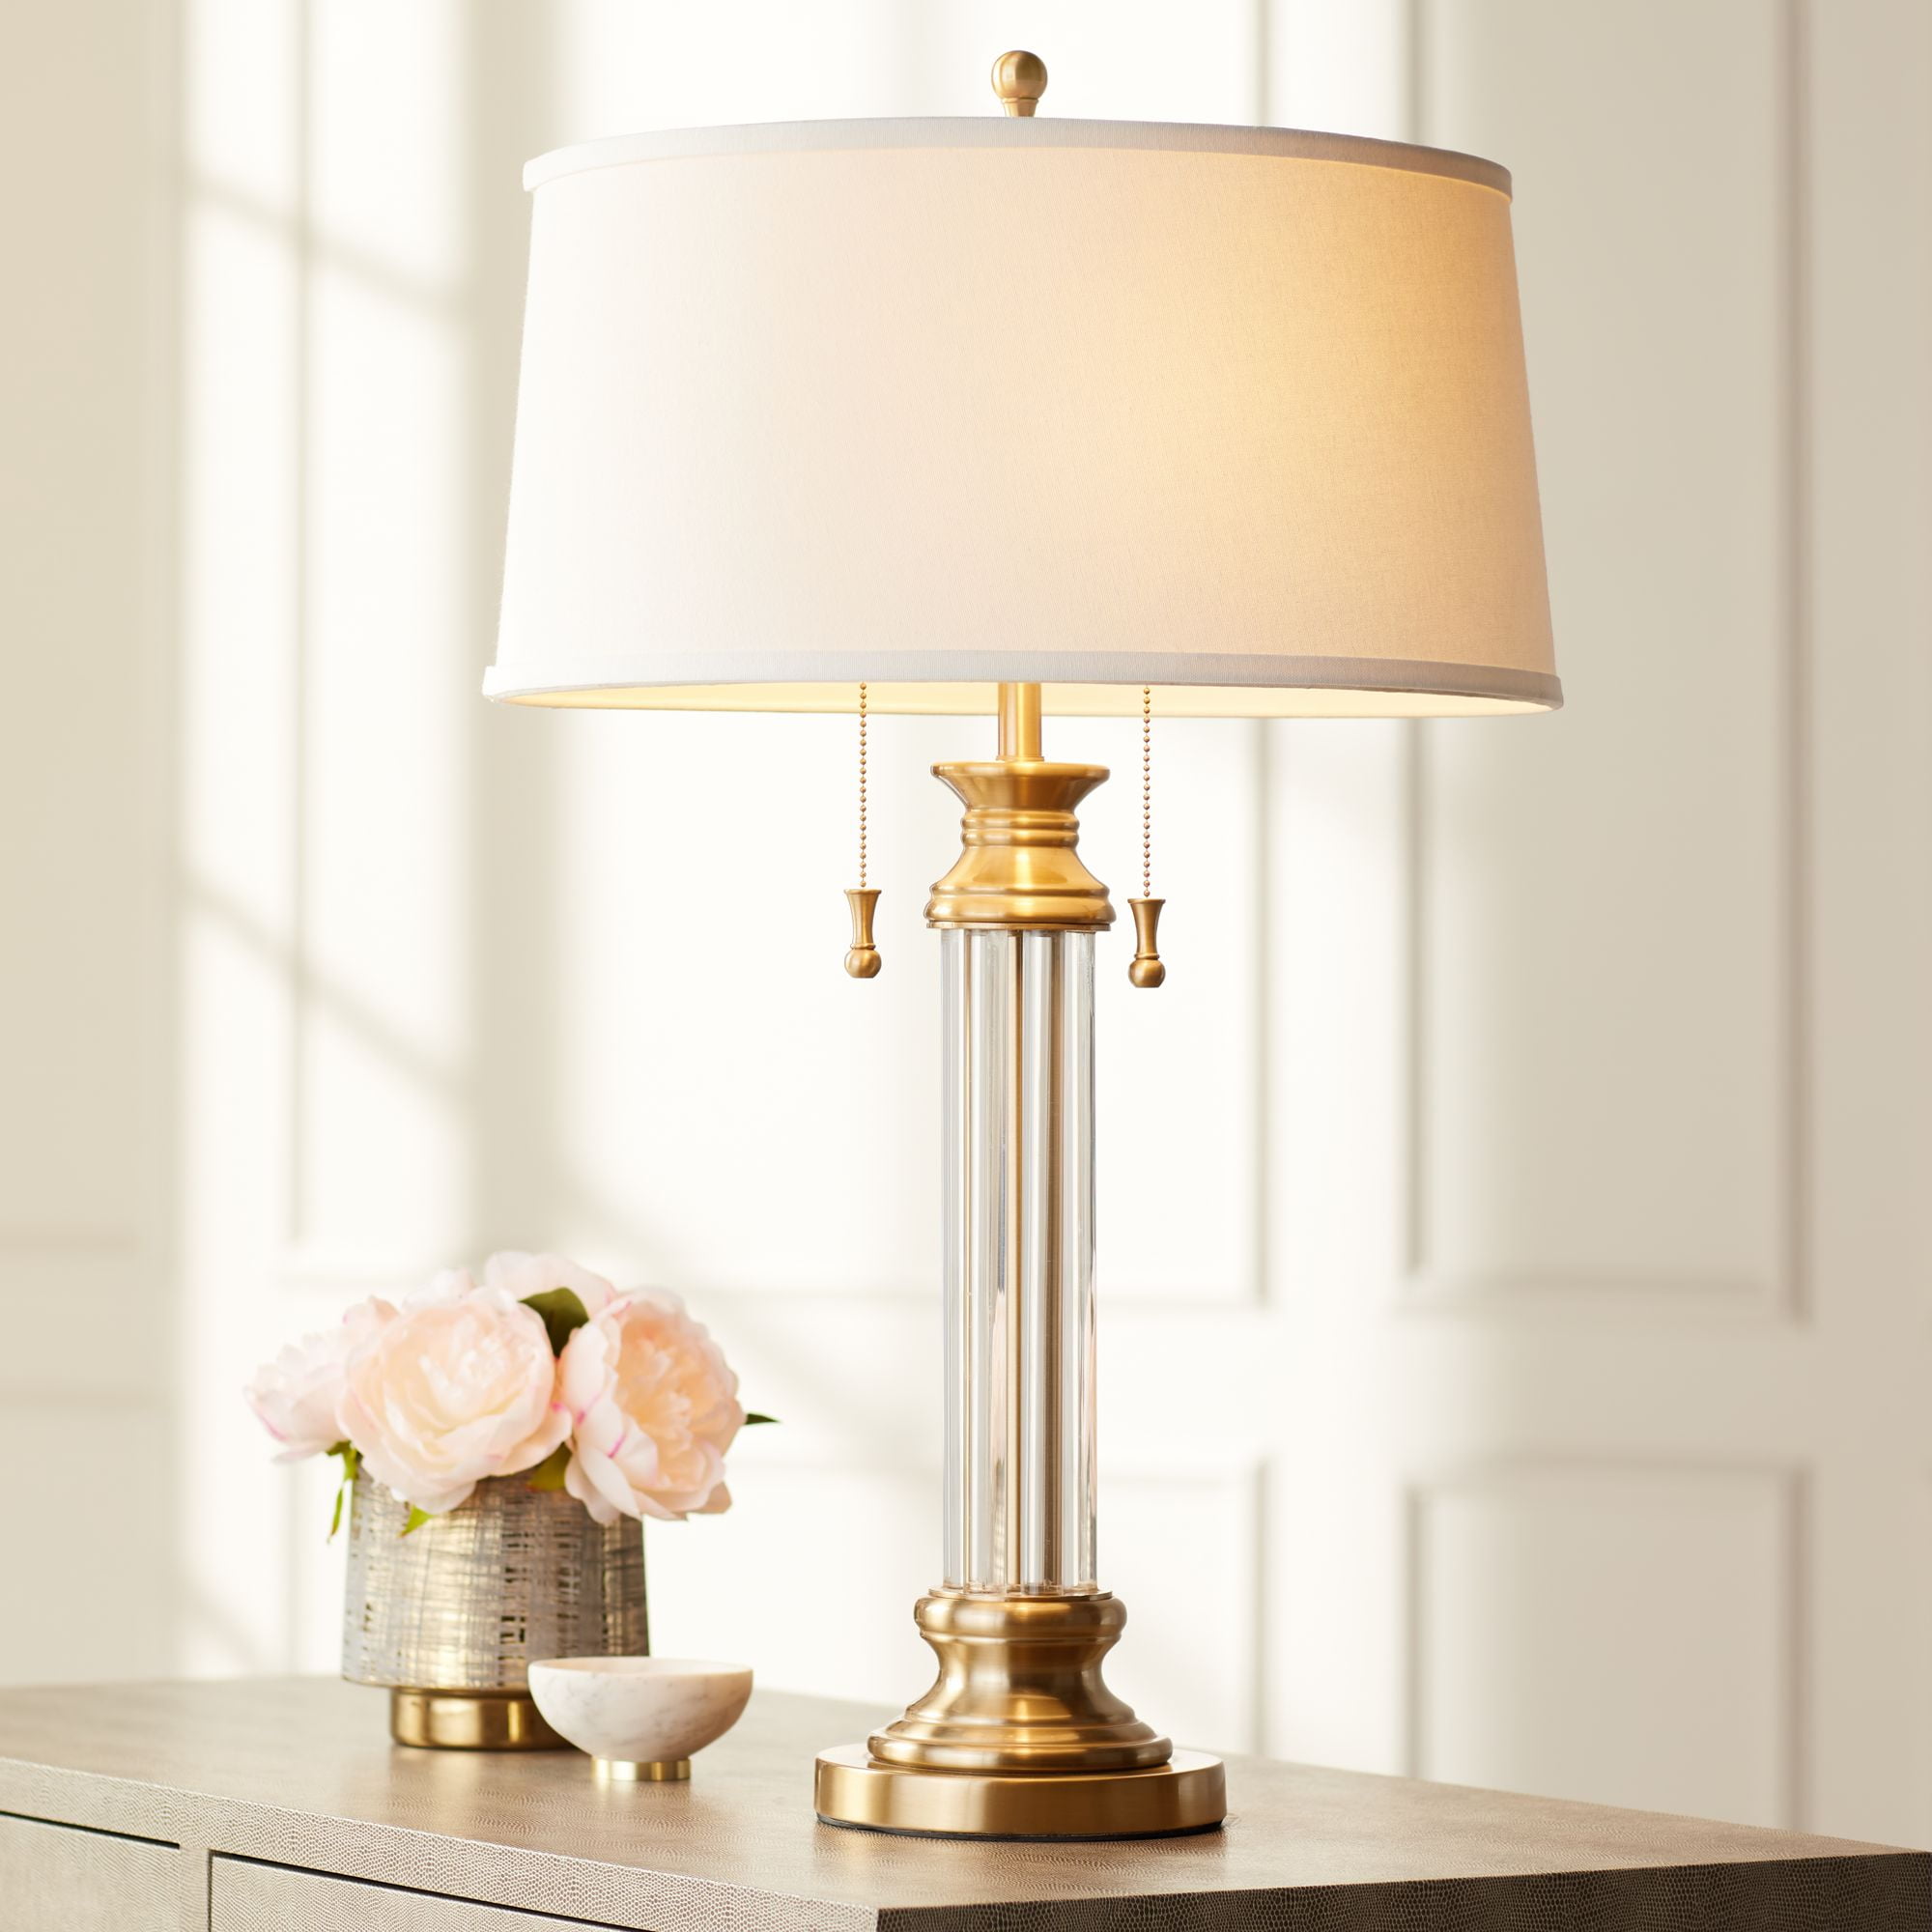 Vienna Full Spectrum Rolland Traditional Table Lamp 30 Tall Crystal Brass  Column Off White Tapered Drum Shade for Bedroom Living Room Bedside Office